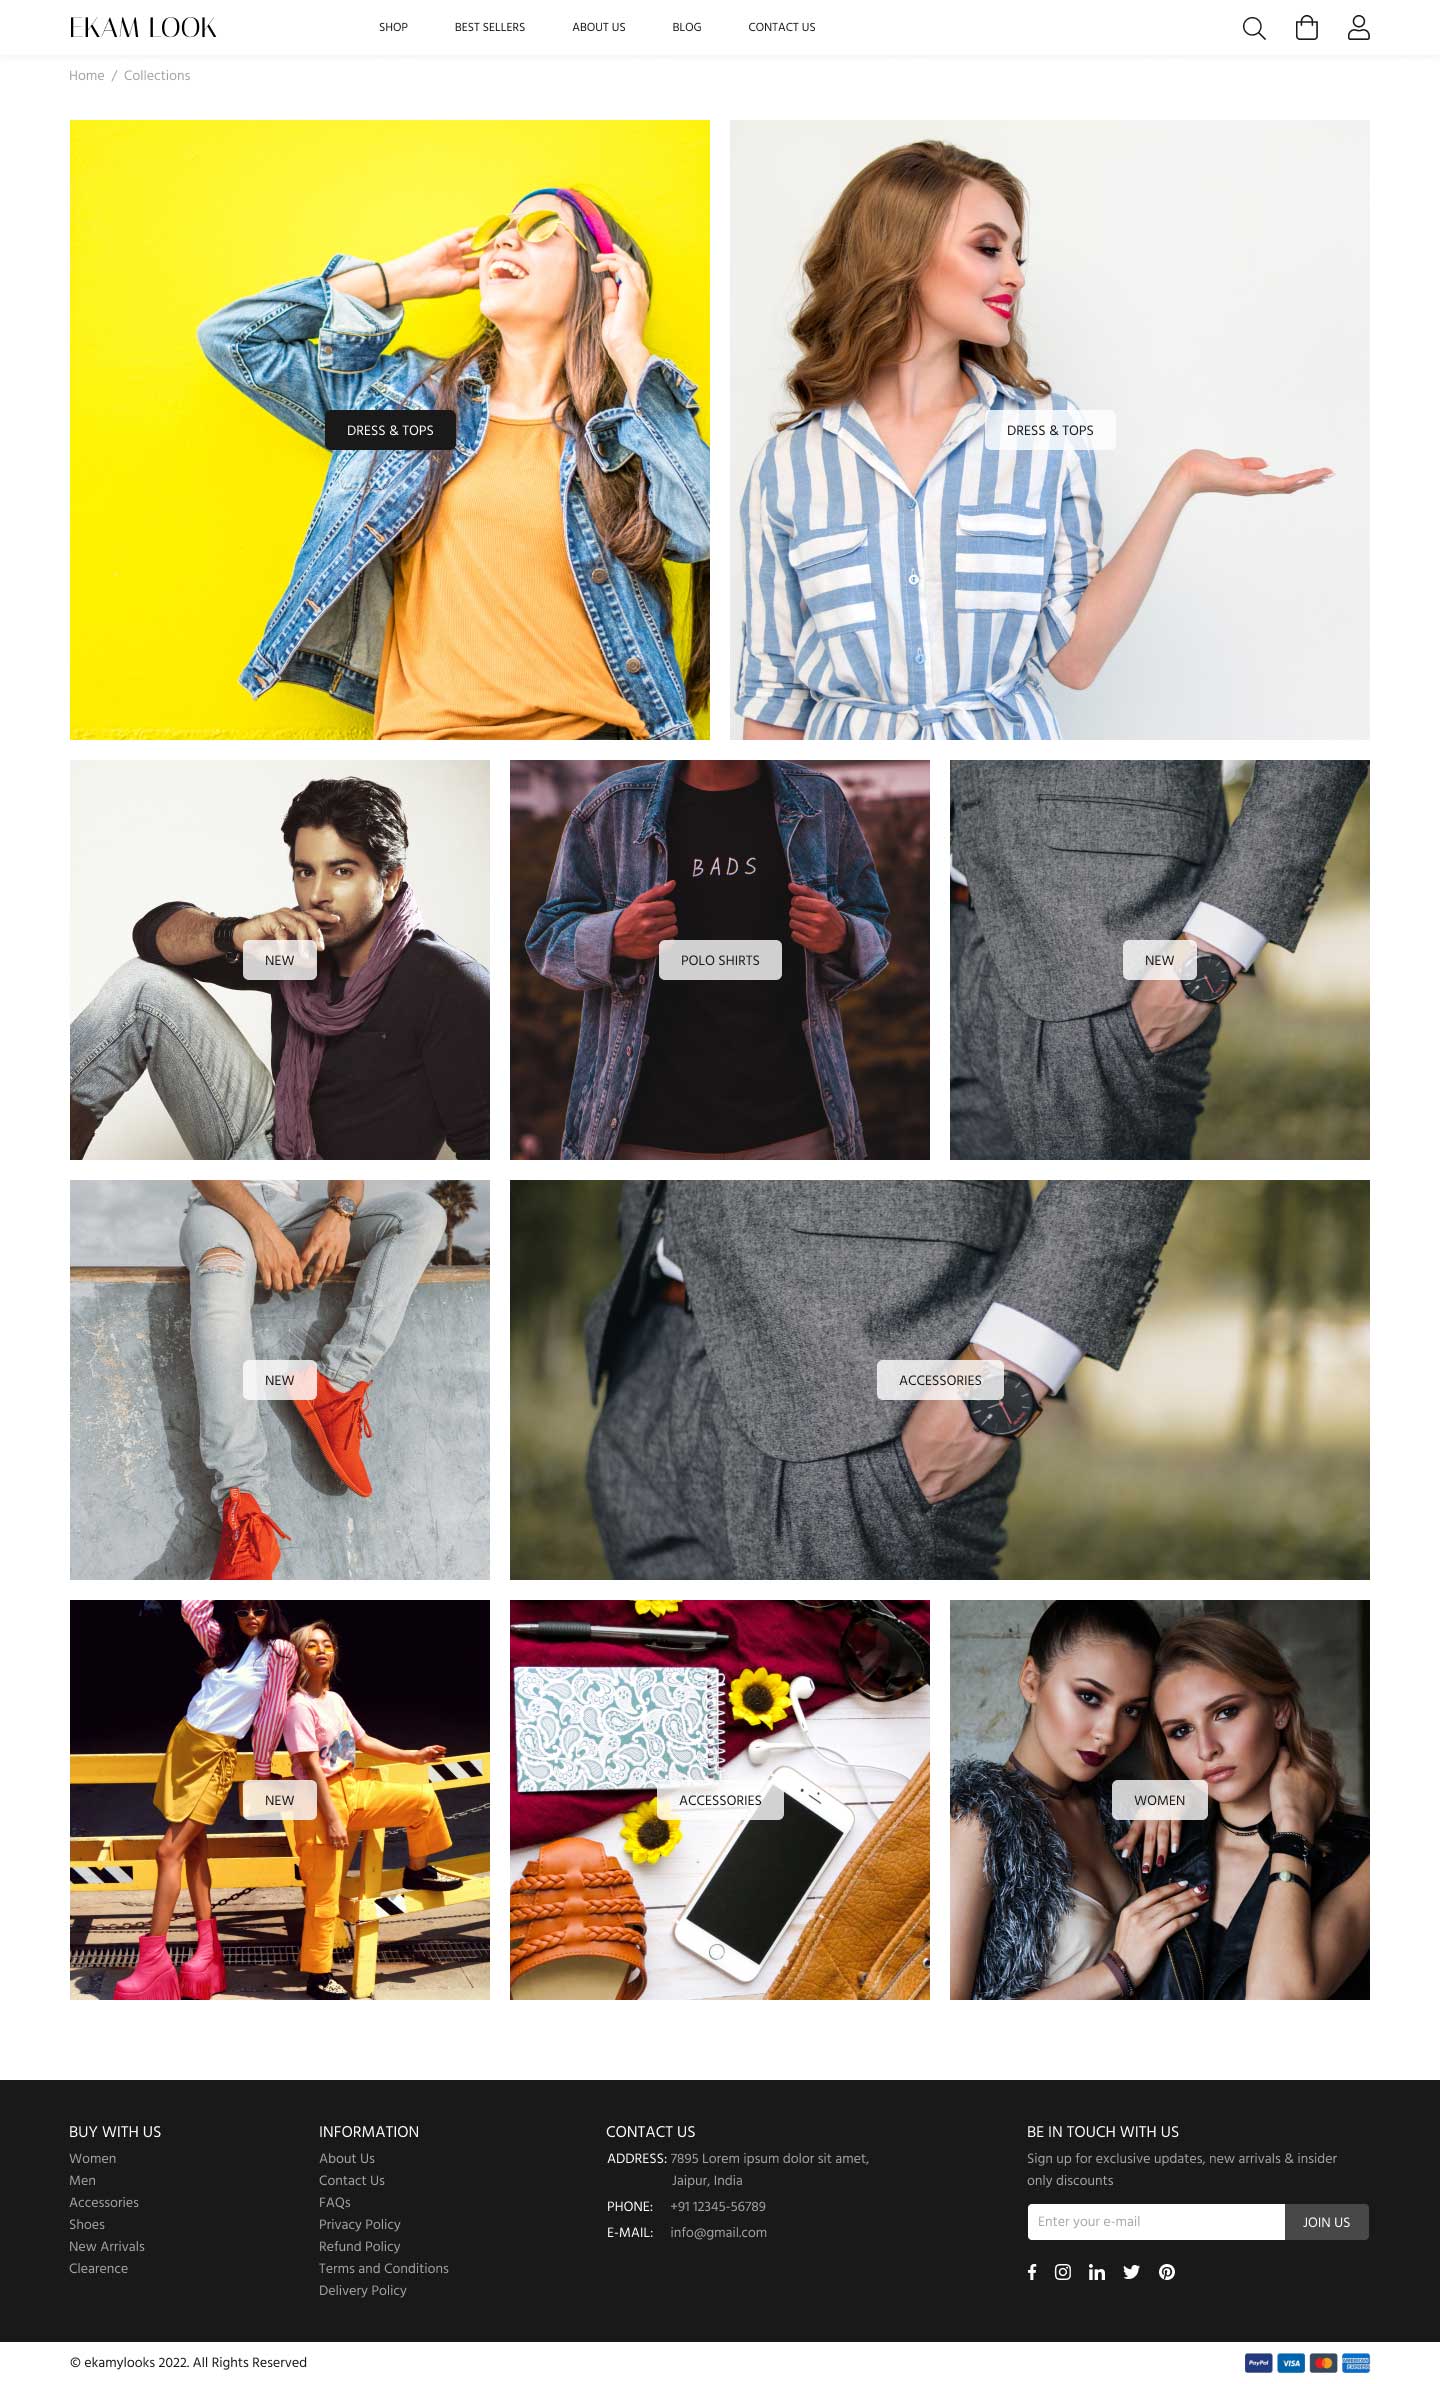 Ekamy-Looks All Collection Page